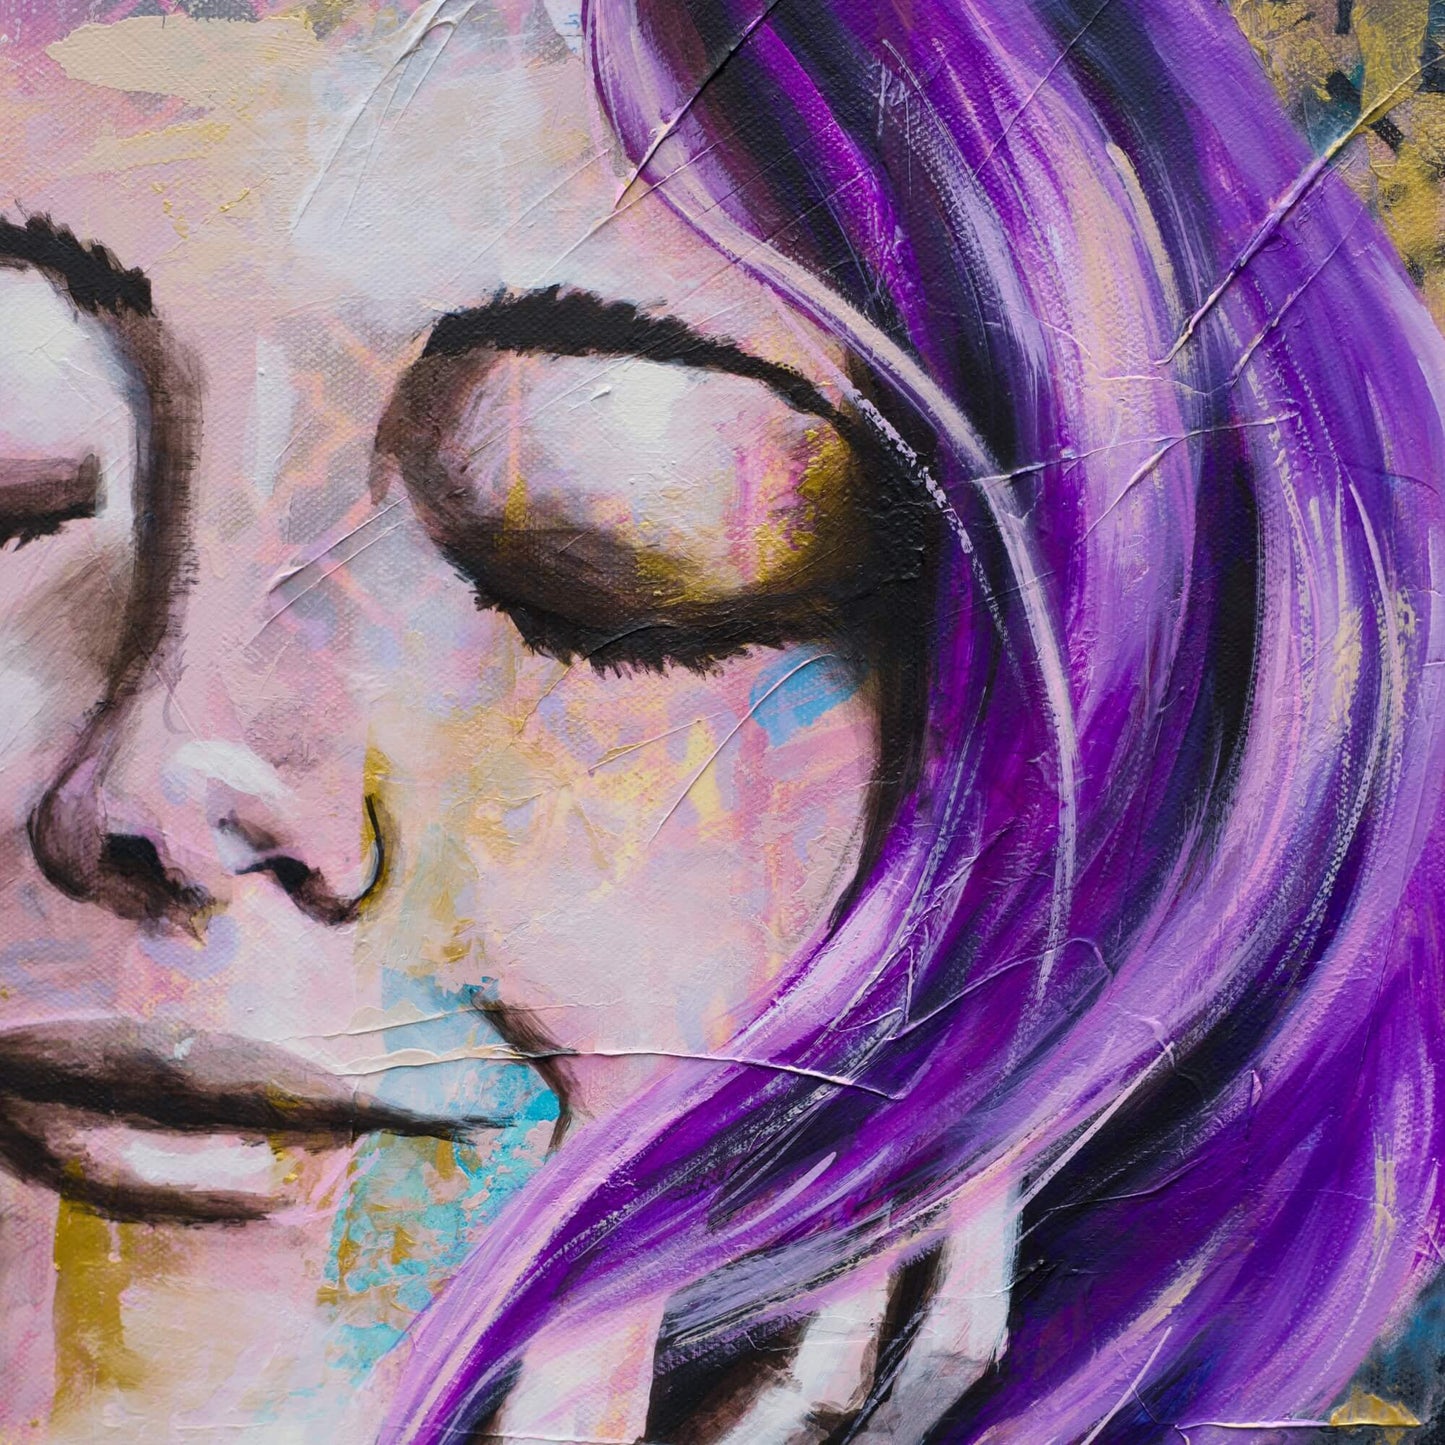 Artworks for Sale – Purple & Gold Painting of Woman – Mixed Media Art – 'Dreamer' – Art Wall Painting by Criss Chaney